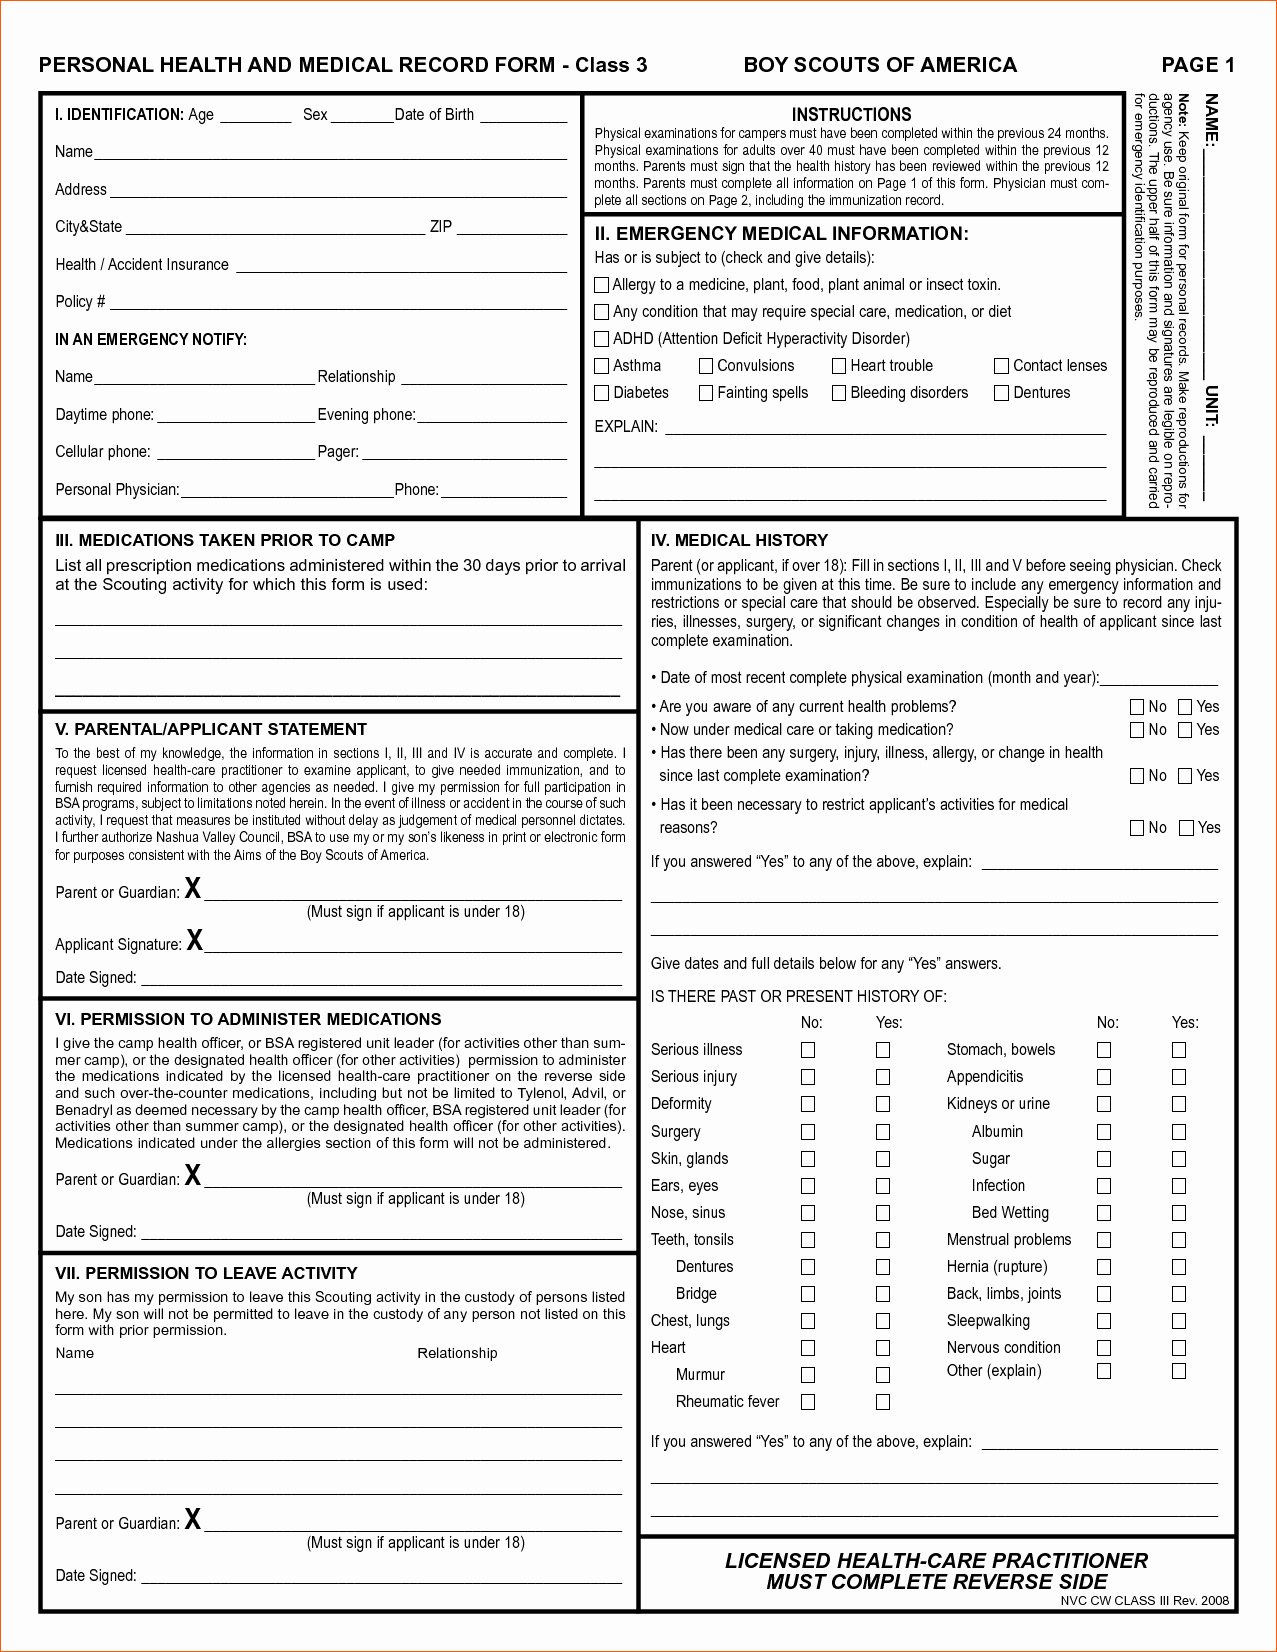 10 Boy Scout Medical forms